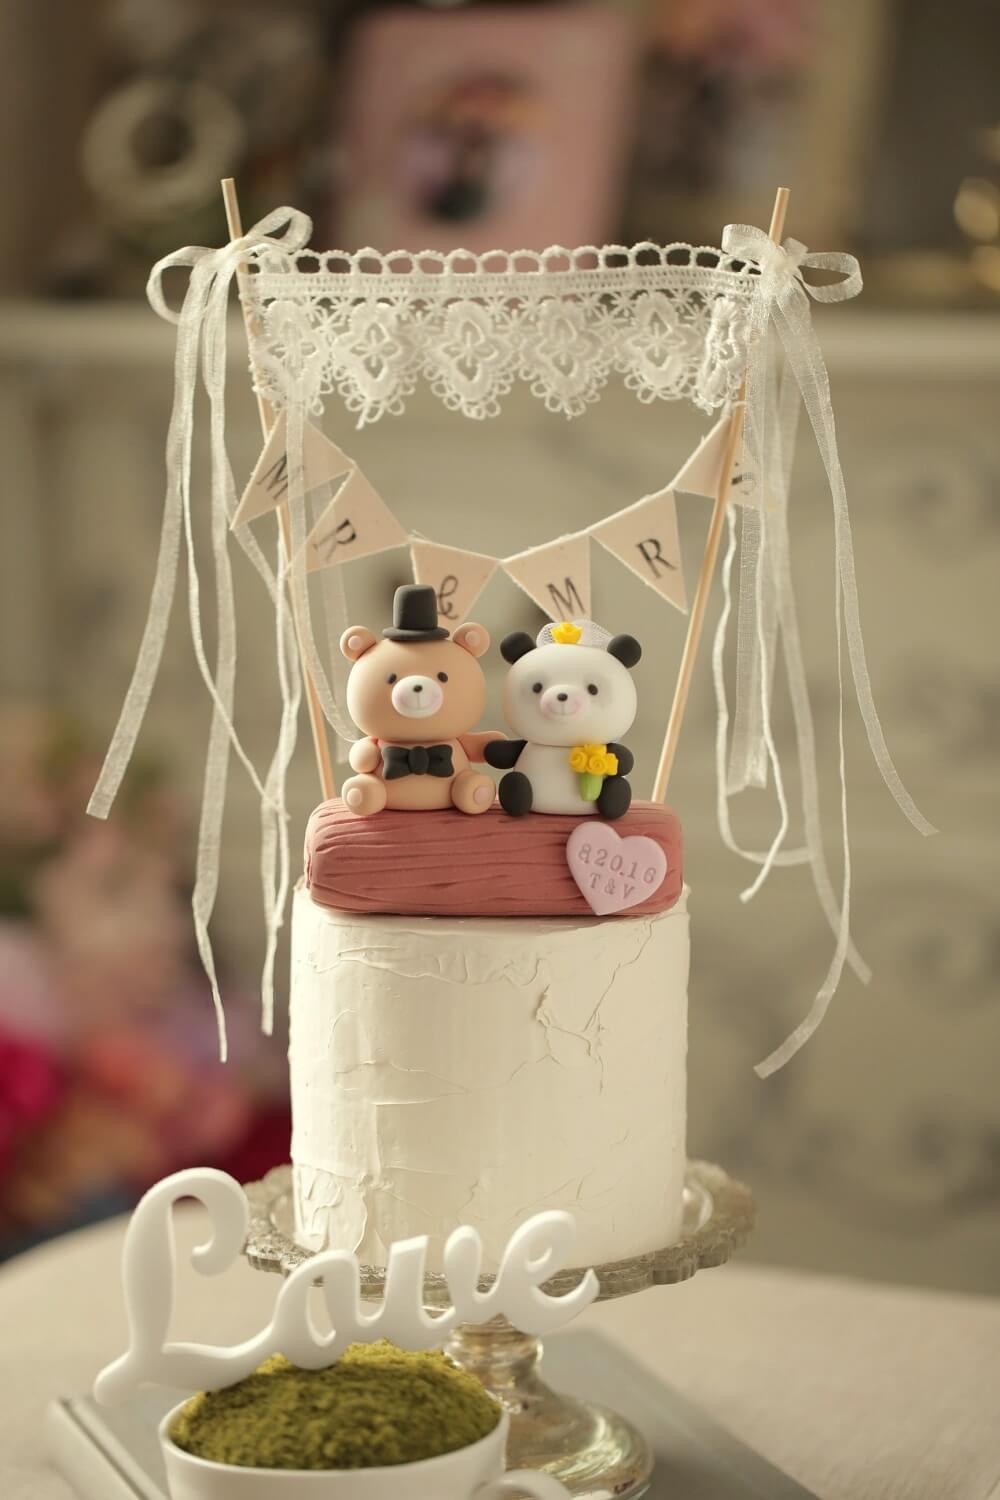 Some Amazing Wedding Cake Toppers That’ll Be A Great Addition To Your D-Day Cake